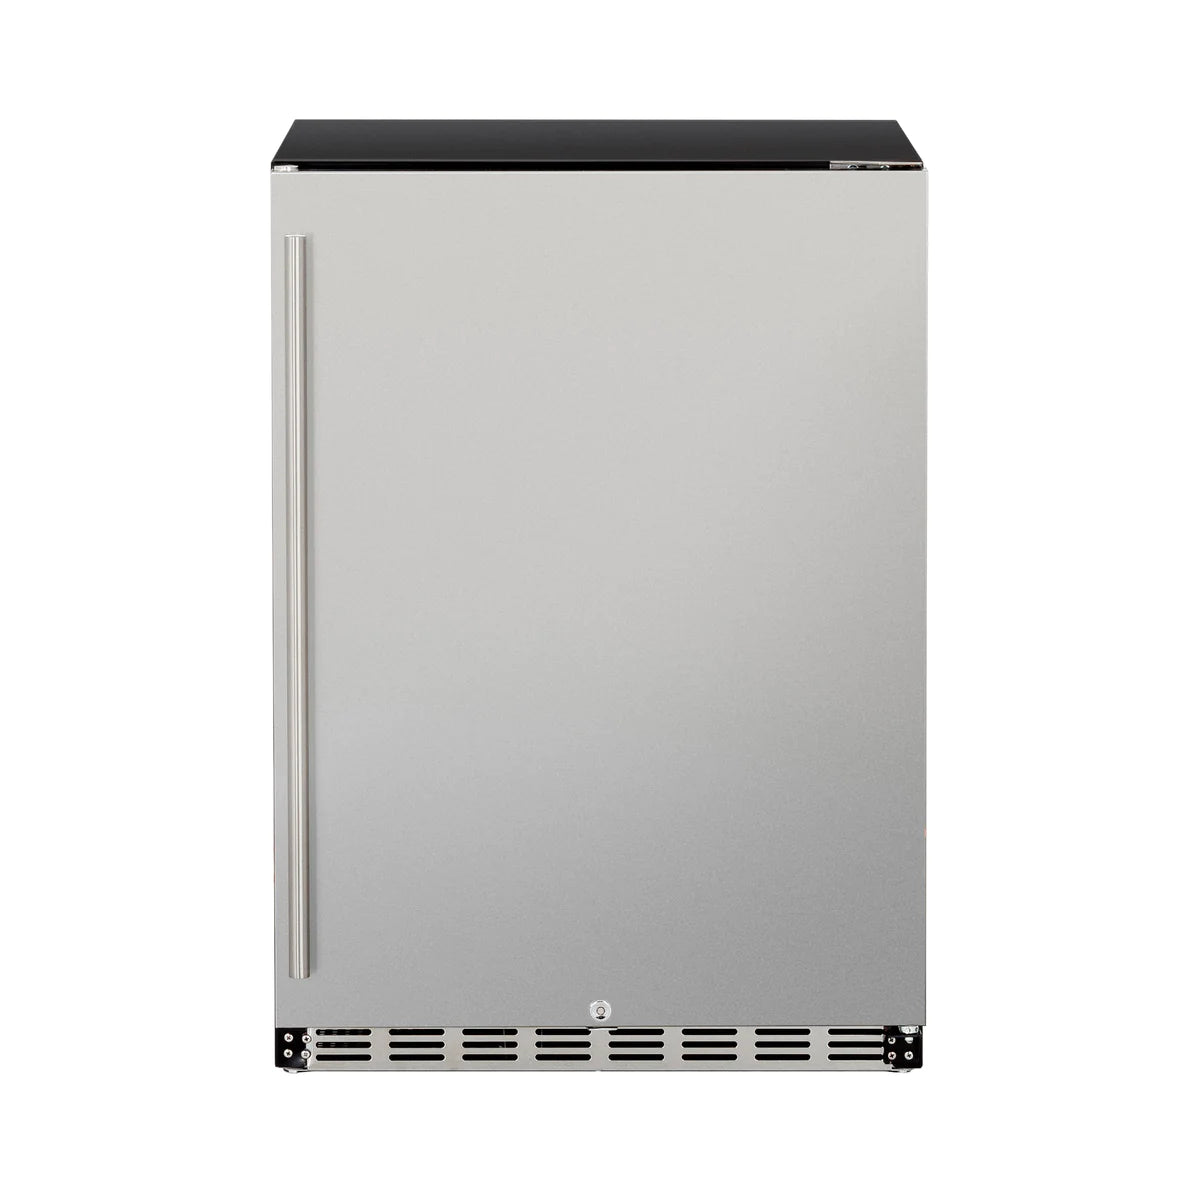 Outdoor Rated Refrigerator - 24" 5.3c